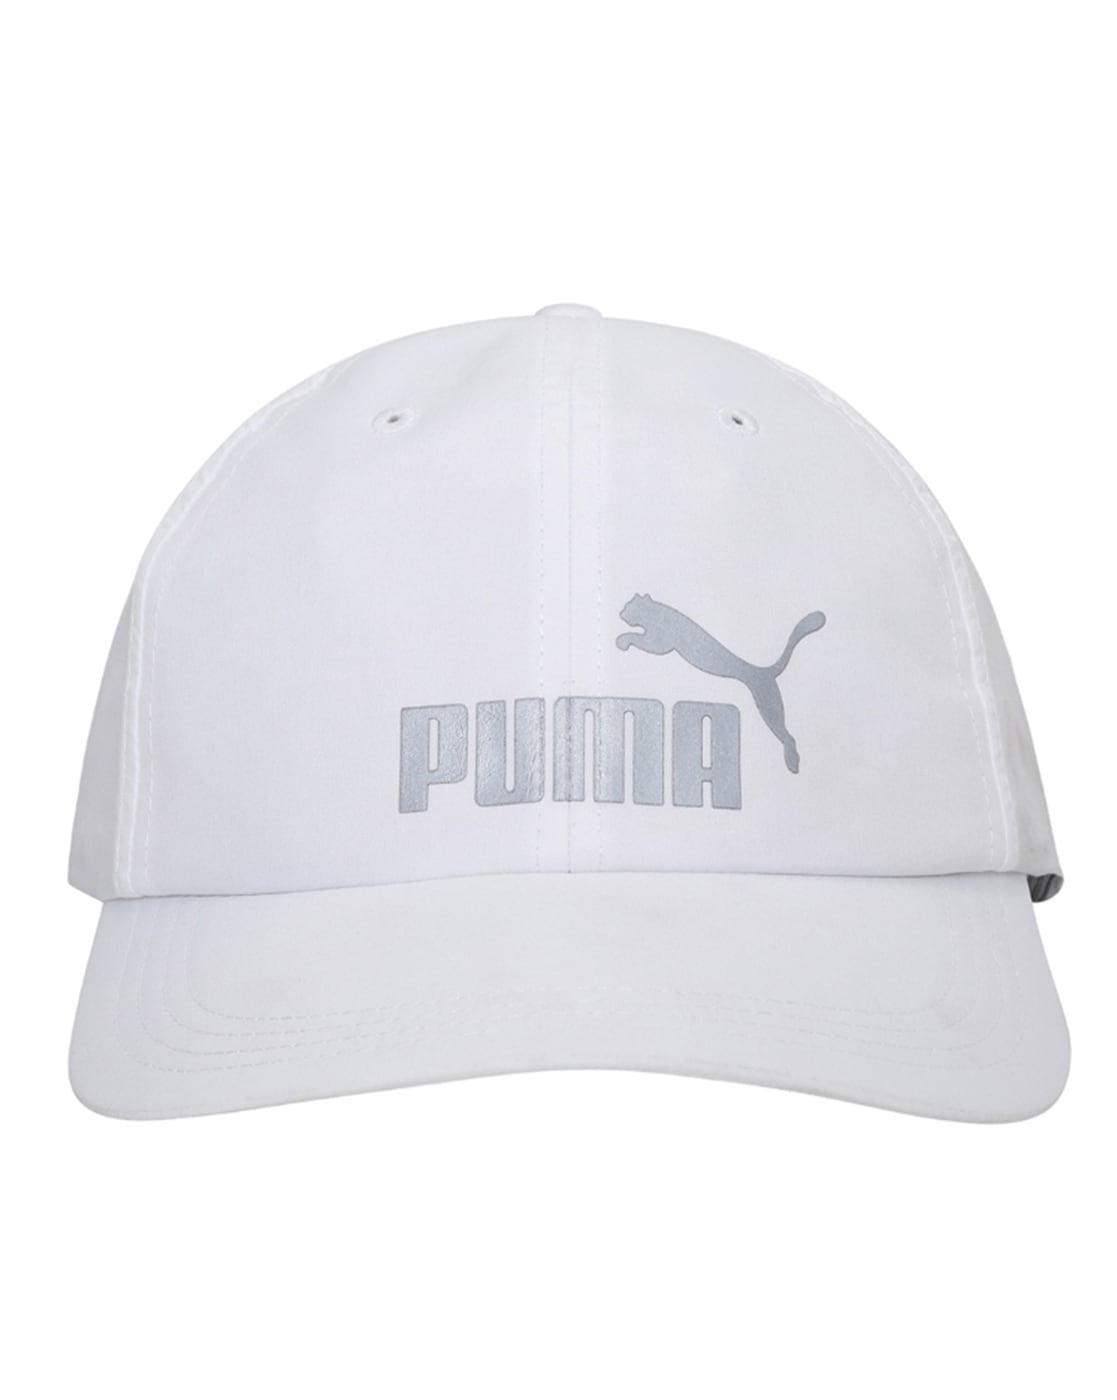 & by Hats for Caps Online Puma Buy Men White